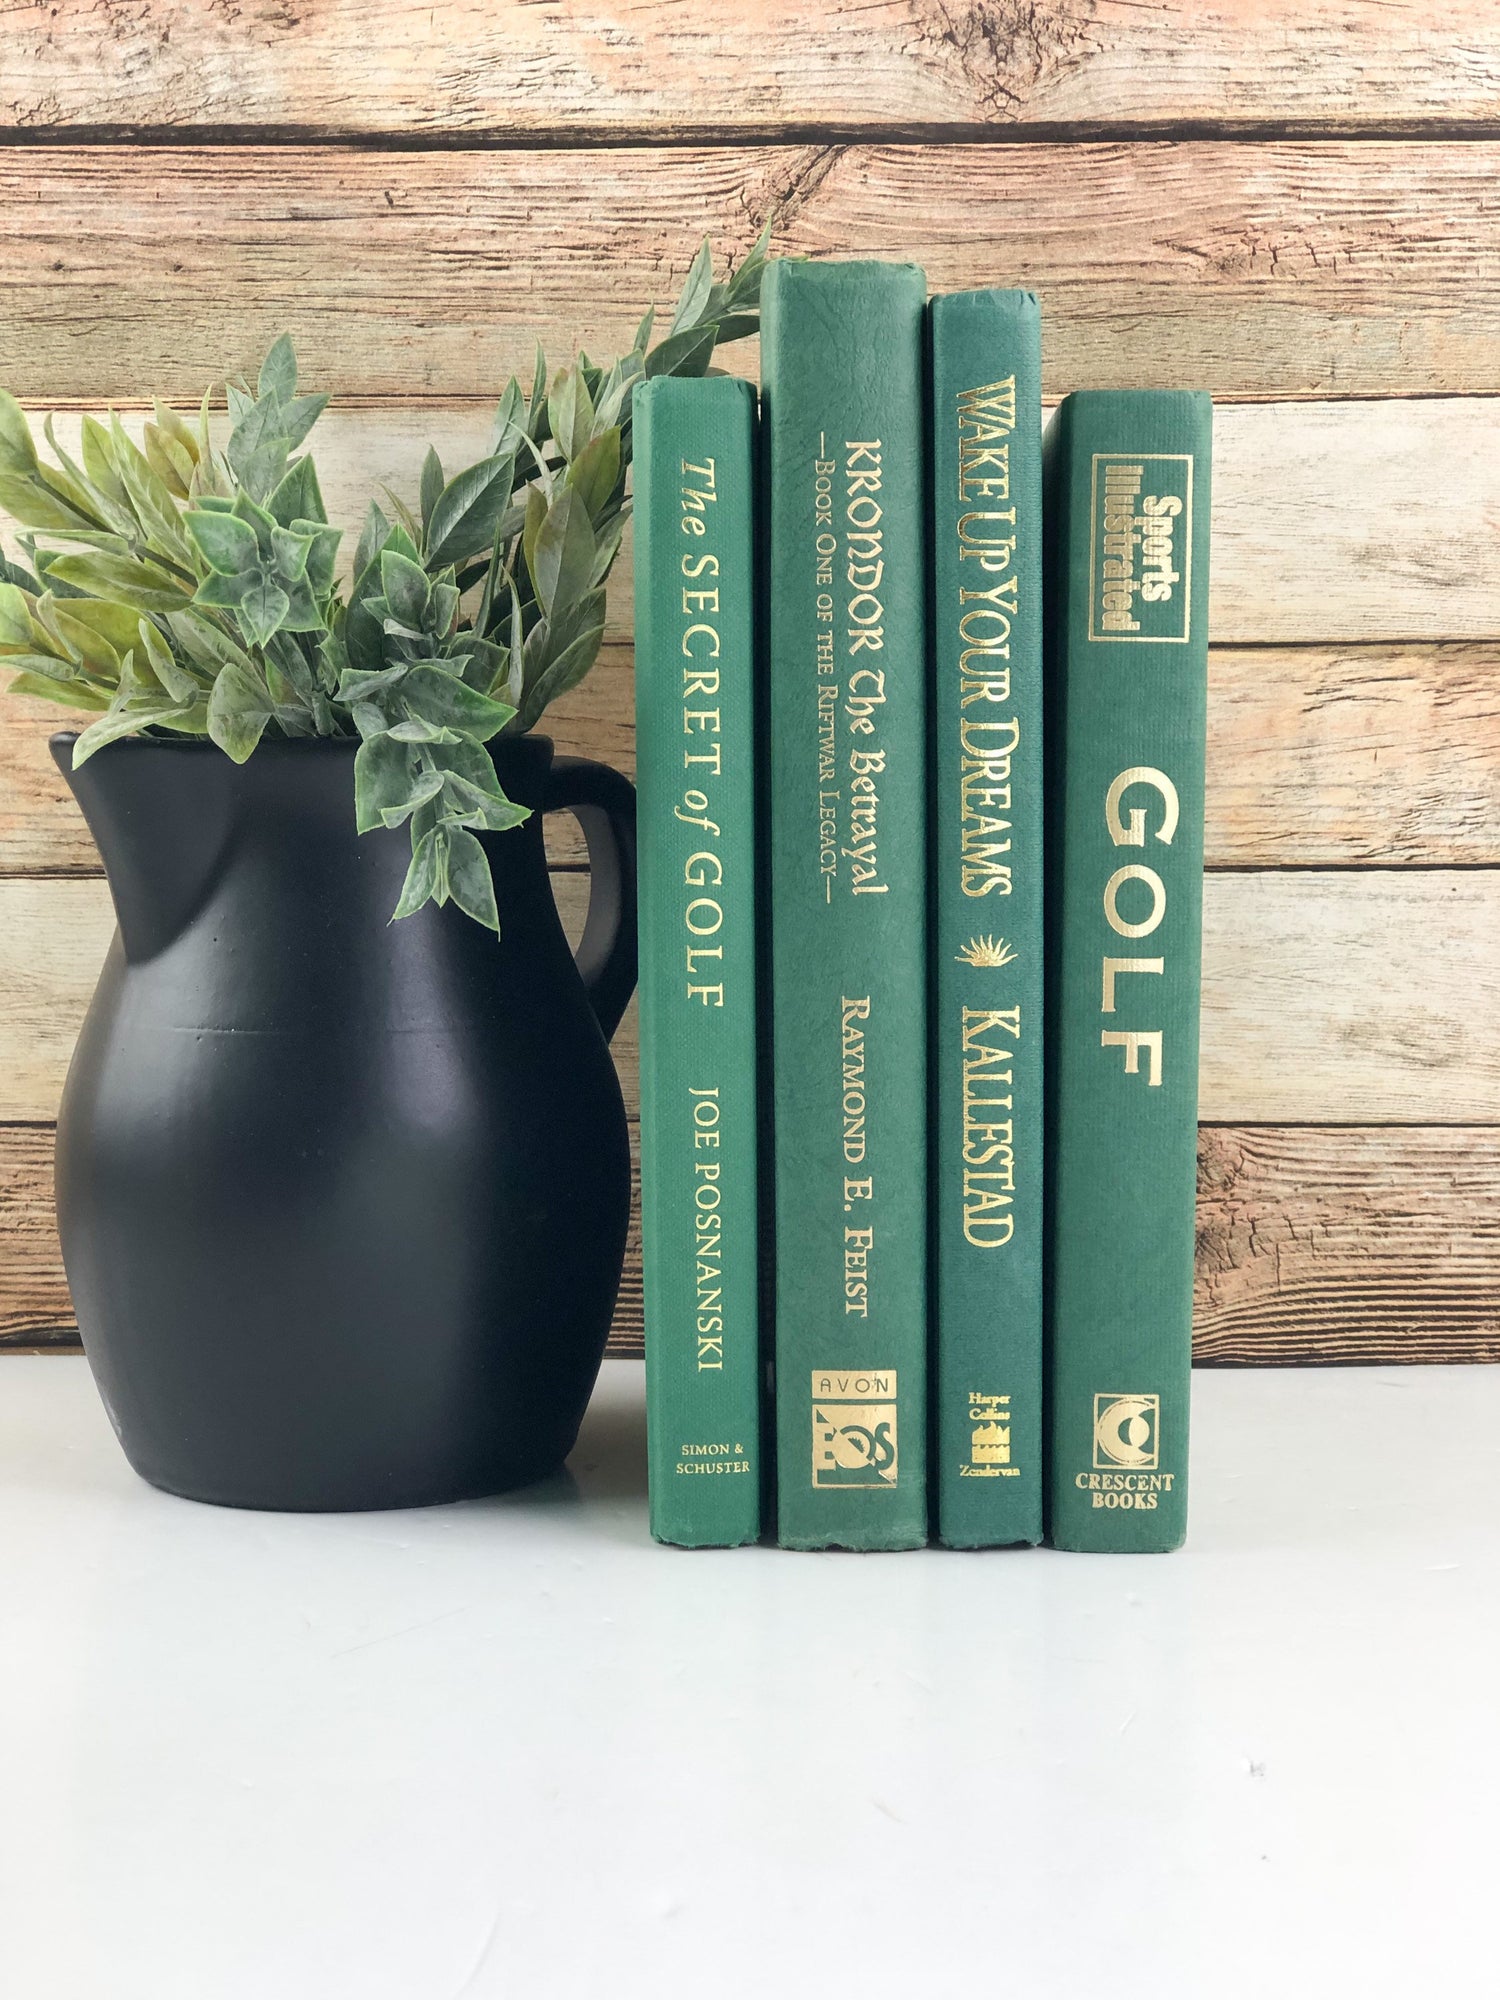 Green Books for Decoration